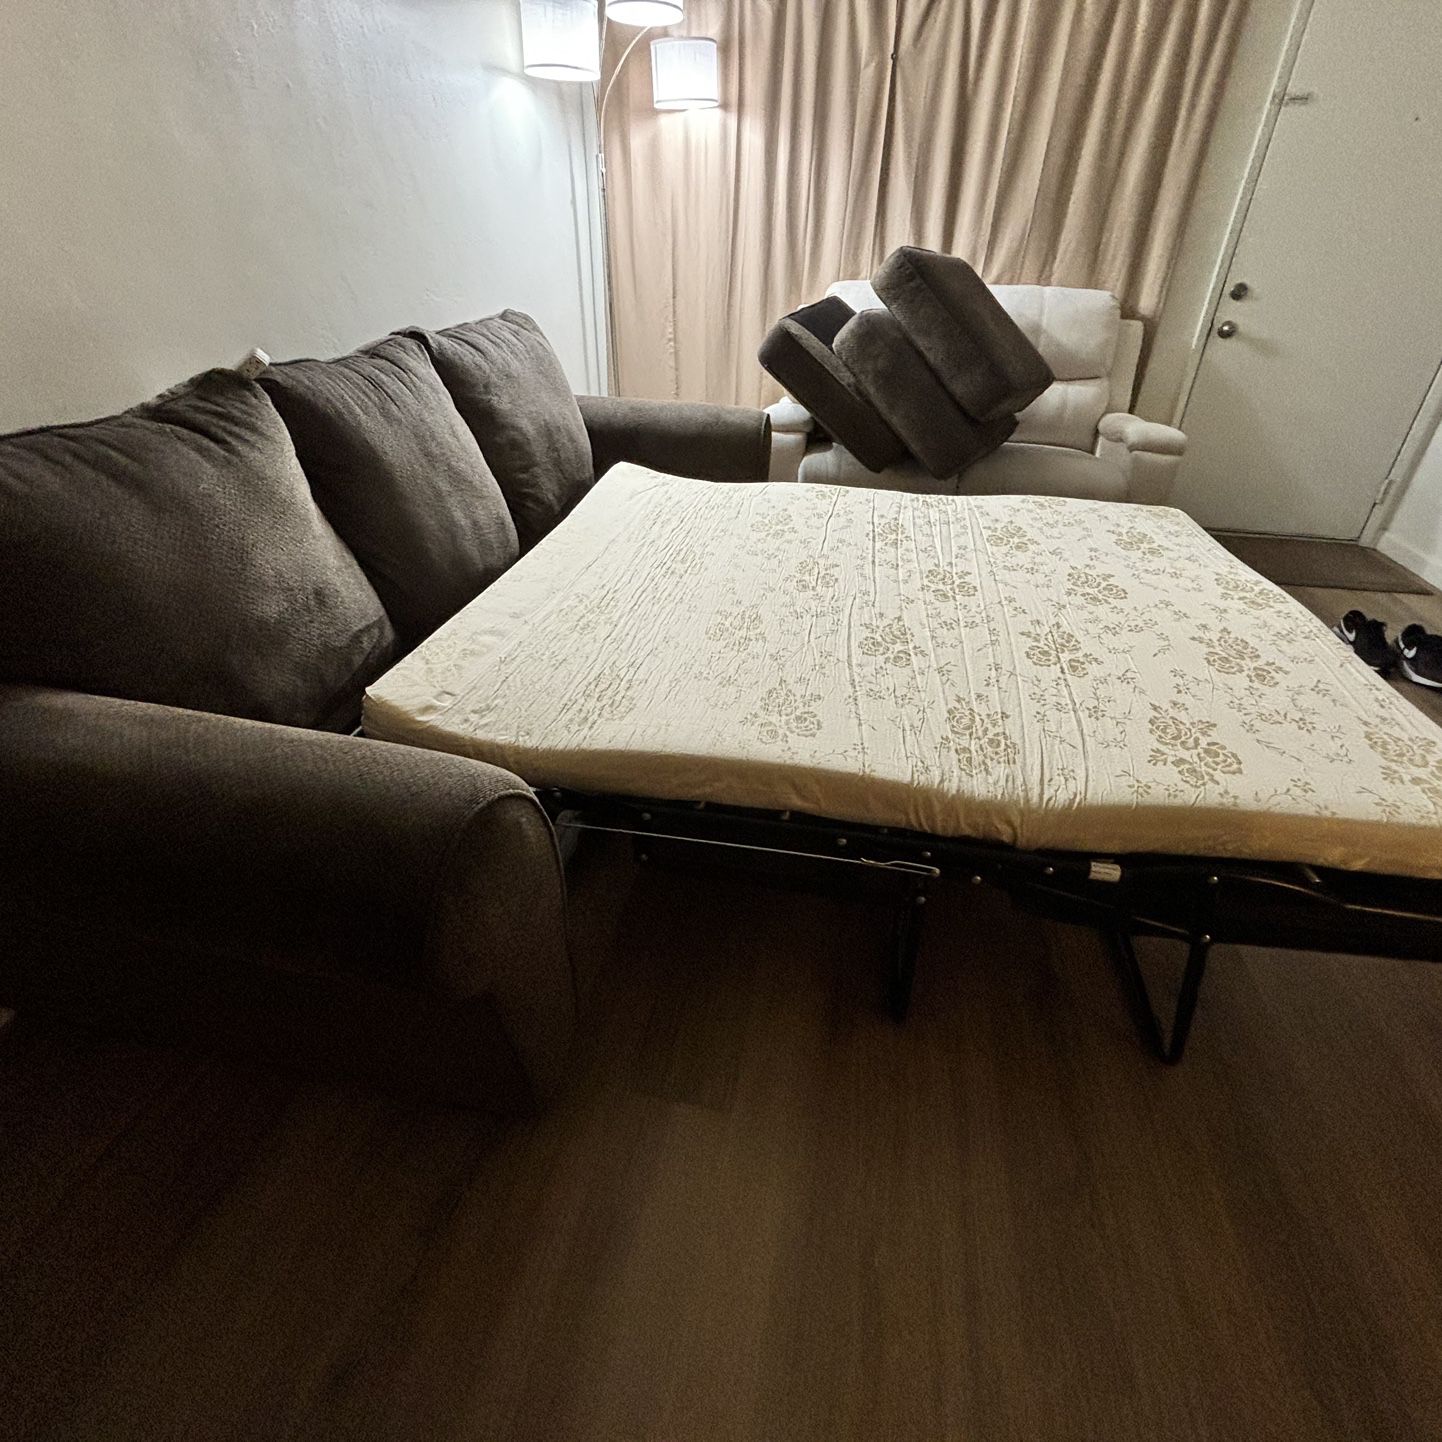 Couch/Bed Furniture